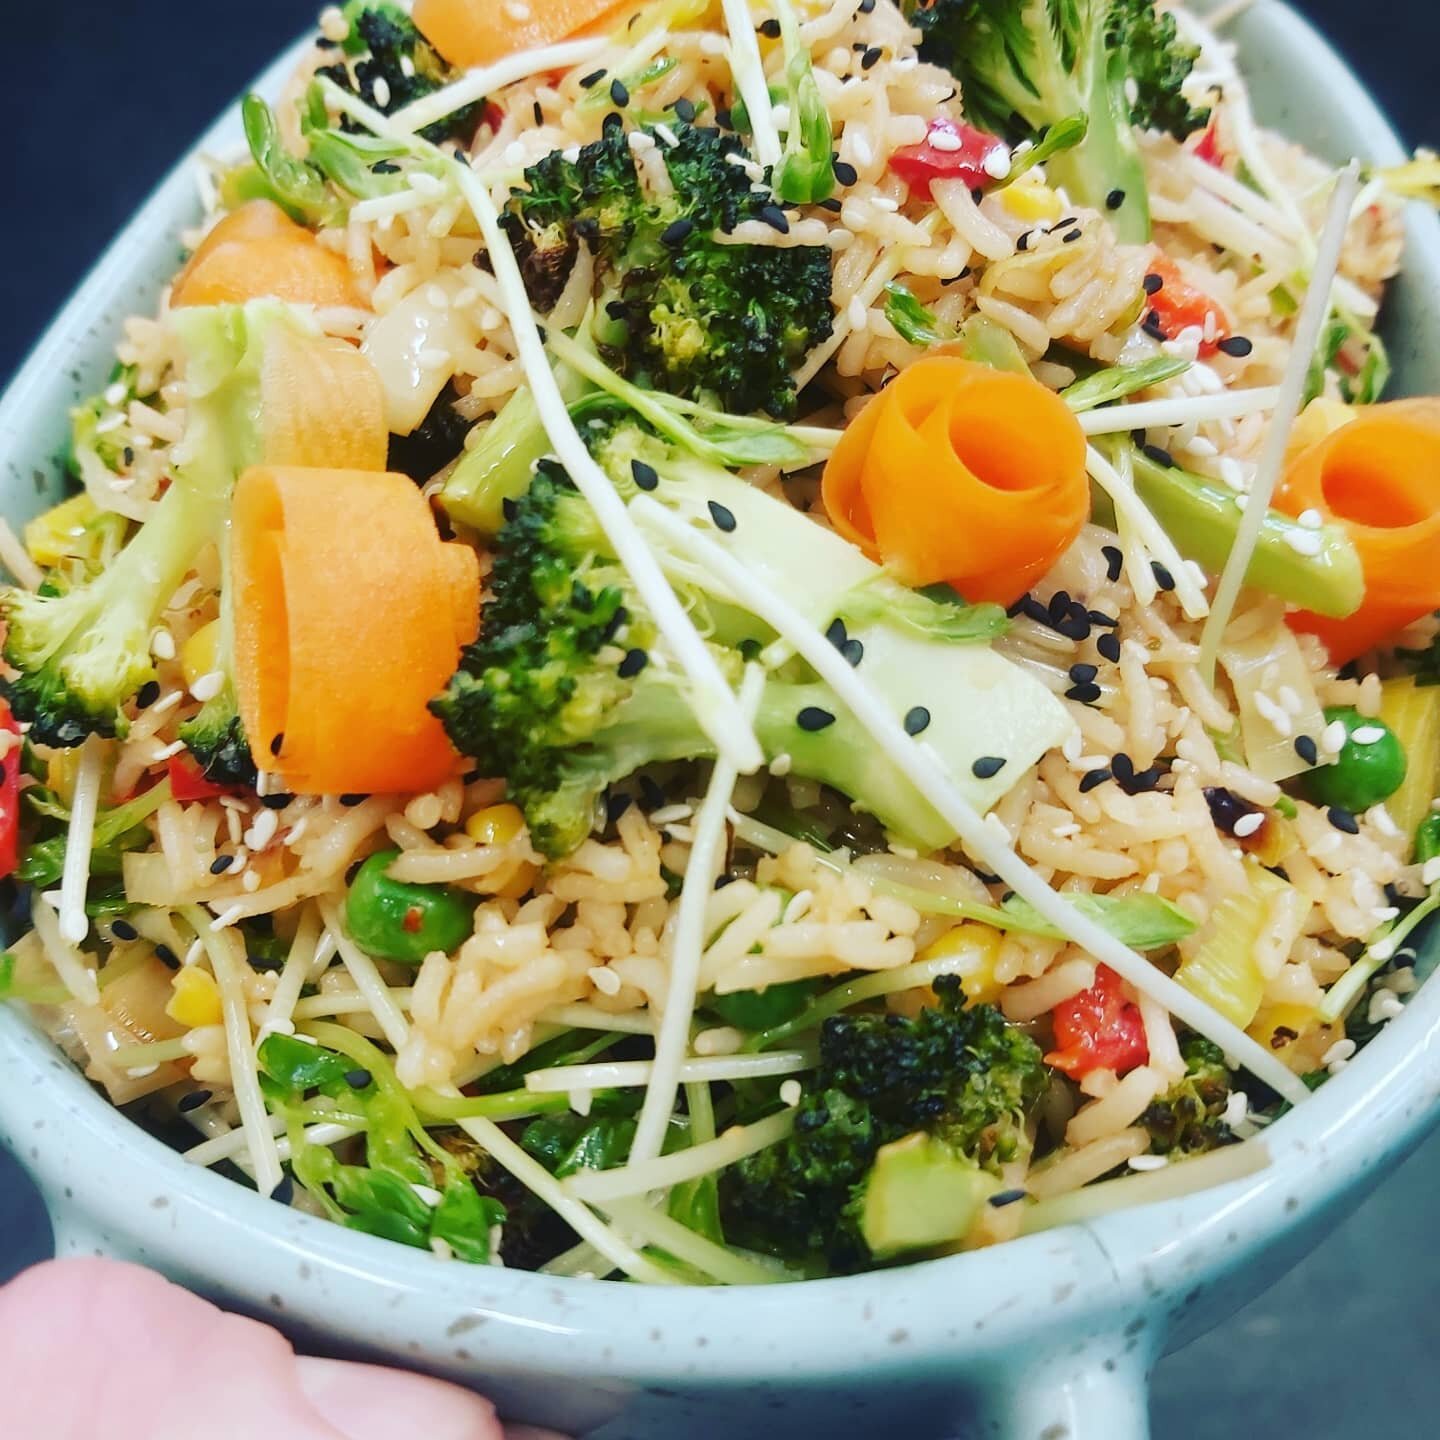 An ode to salad
So colorful and bright
If done well you are &quot;tight!&quot;
With flavours so bold
I'll eat you even when its cold

Fried Rice in the cabinet today!
Come and get it....GF/VE and tasty as....

#colorsmakemehappy #imakefriendswithsala